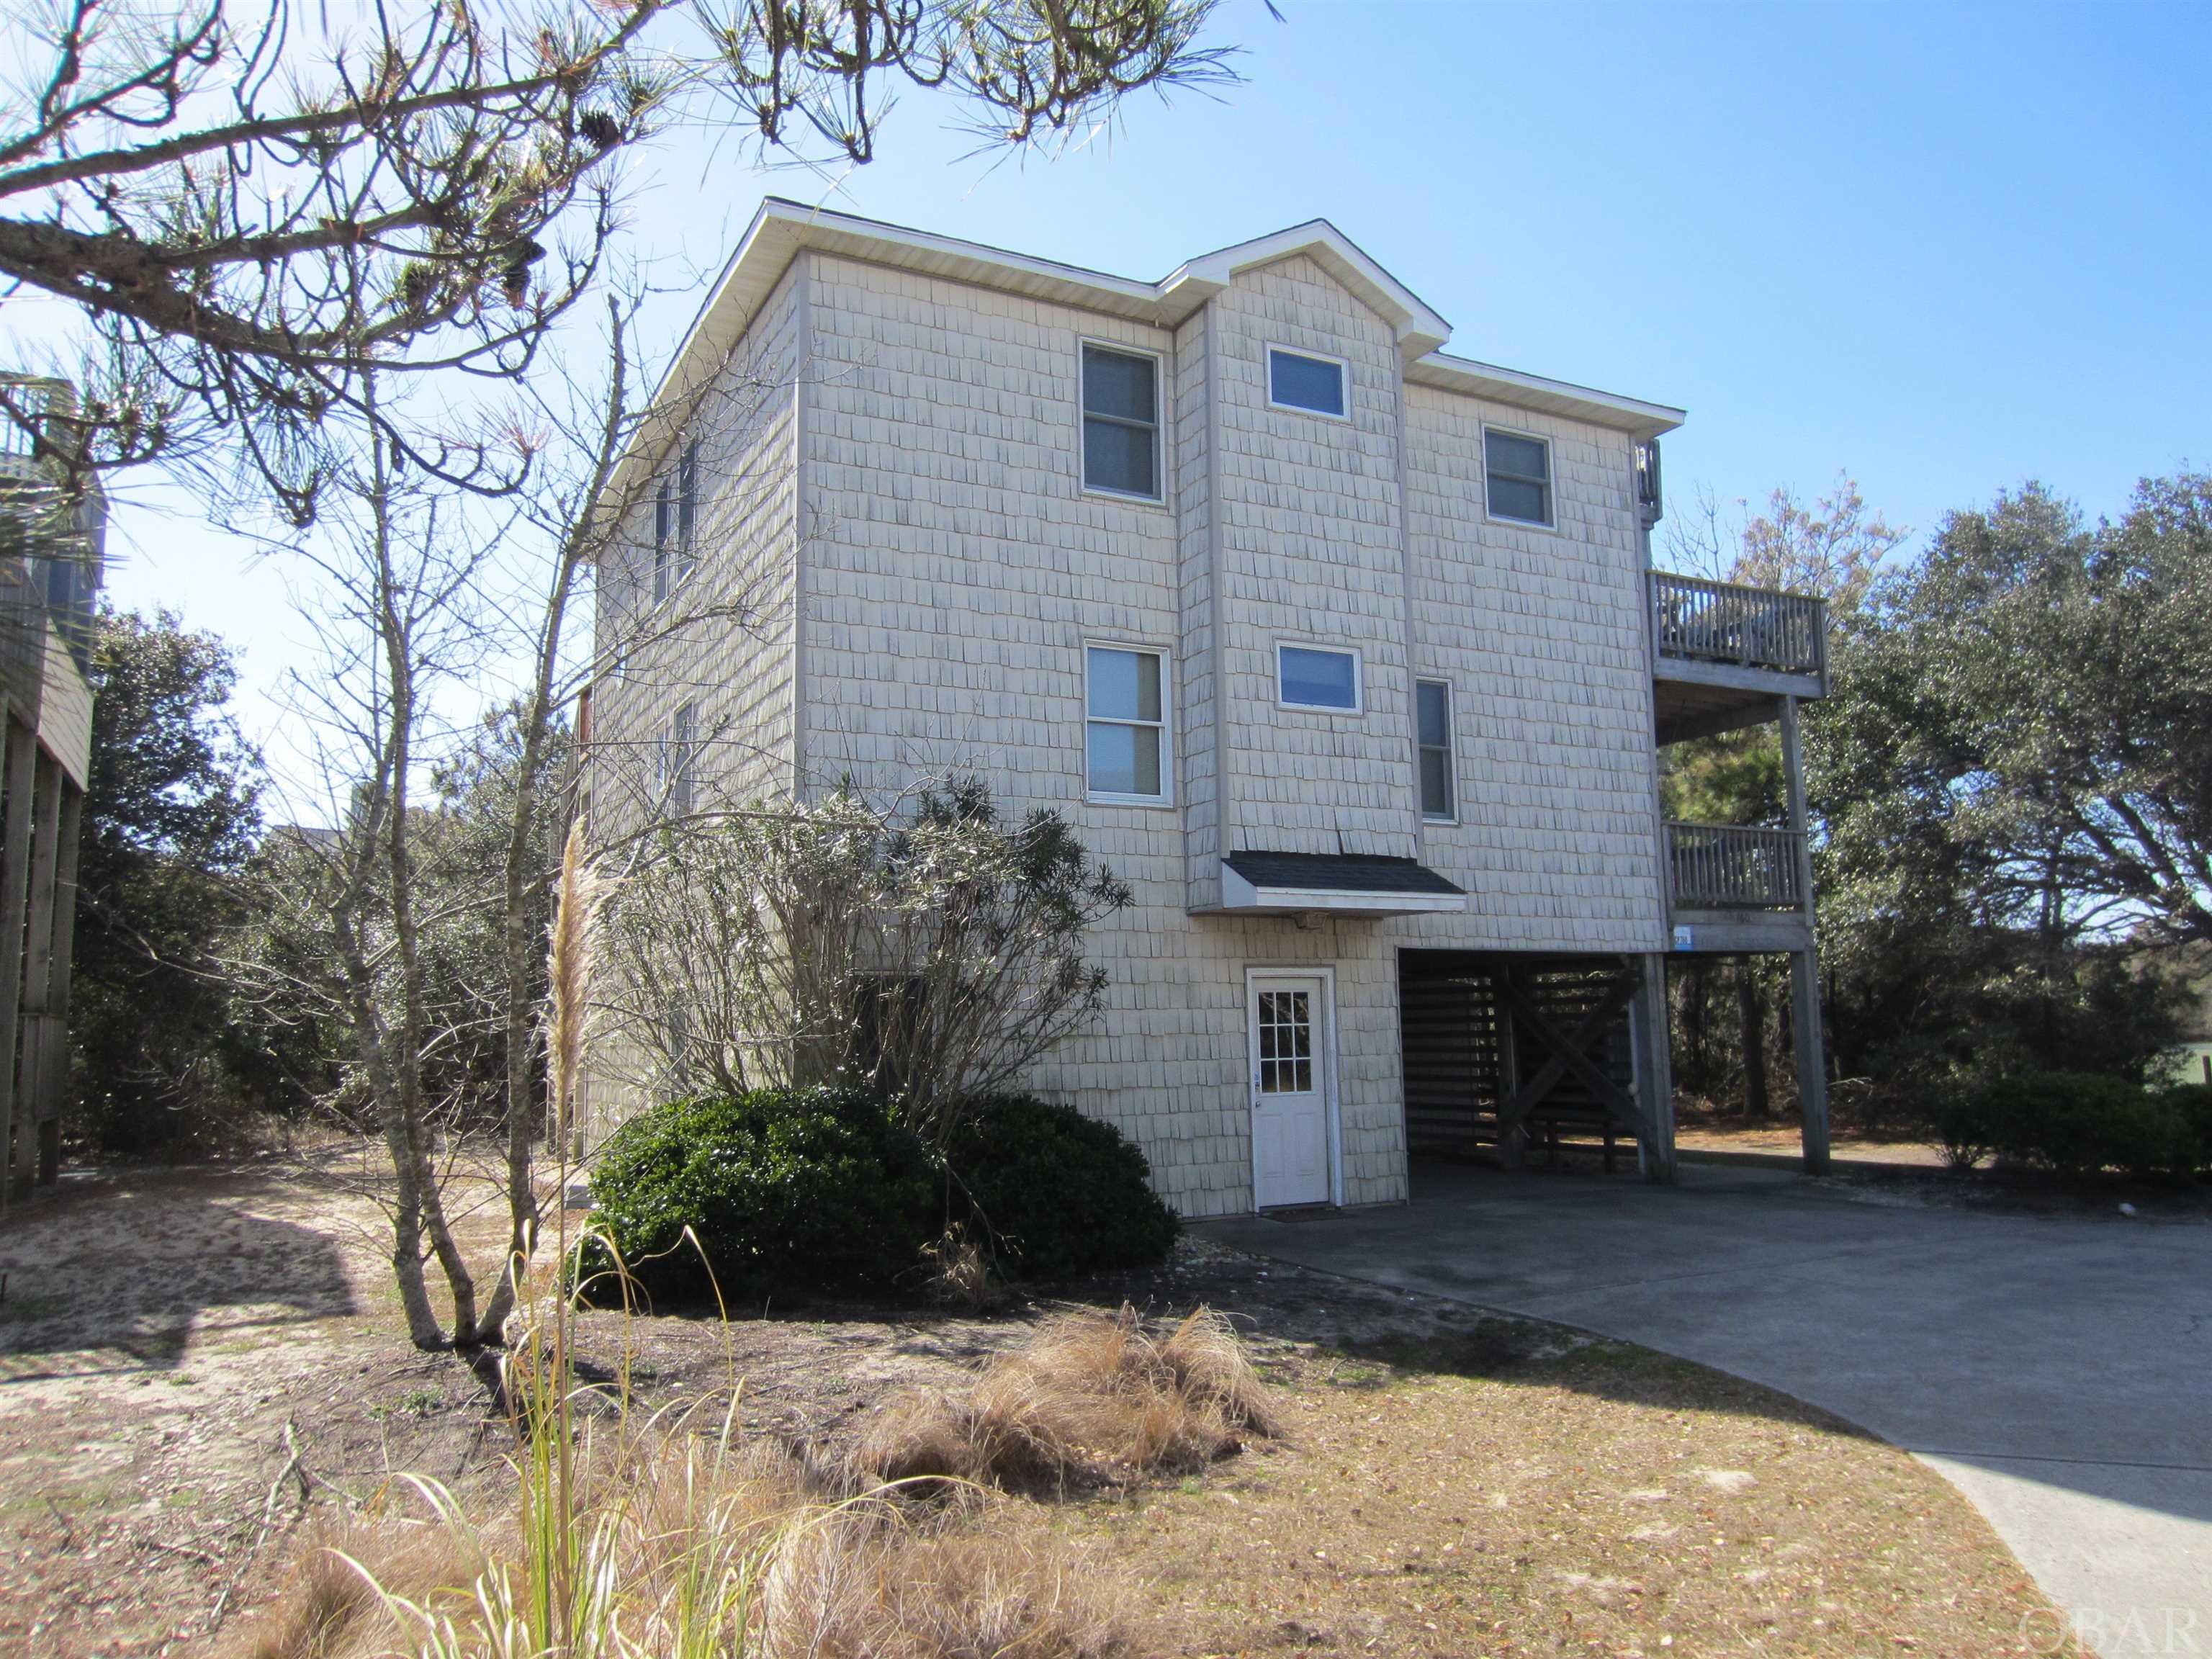 760 Crown Point Circle, Corolla, NC 27927, 4 Bedrooms Bedrooms, ,3 BathroomsBathrooms,Residential,For sale,Crown Point Circle,124800